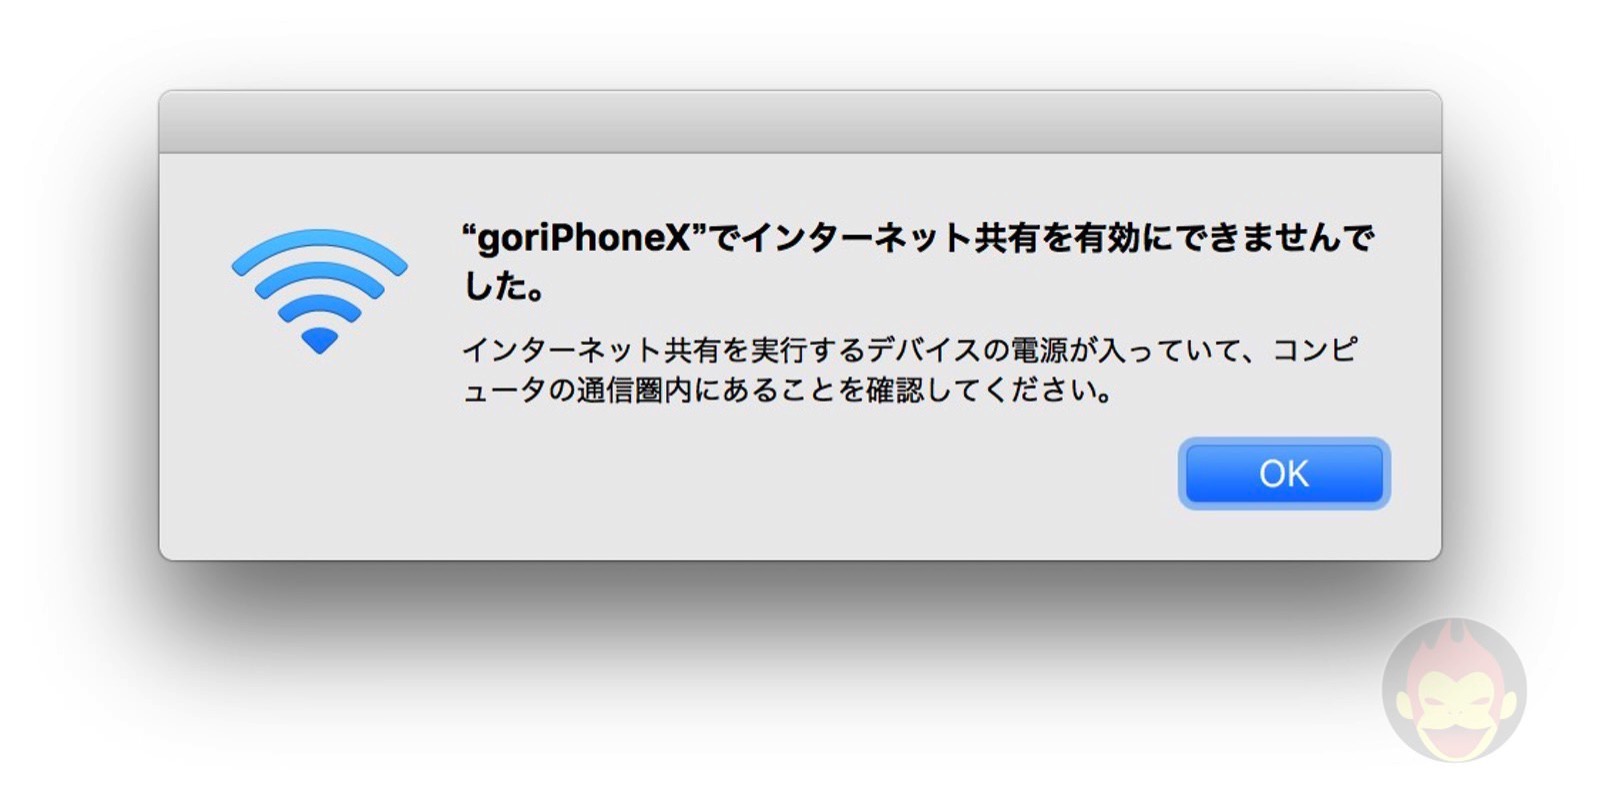 Tethering-with-iPhone-to-Mac-01.jpg